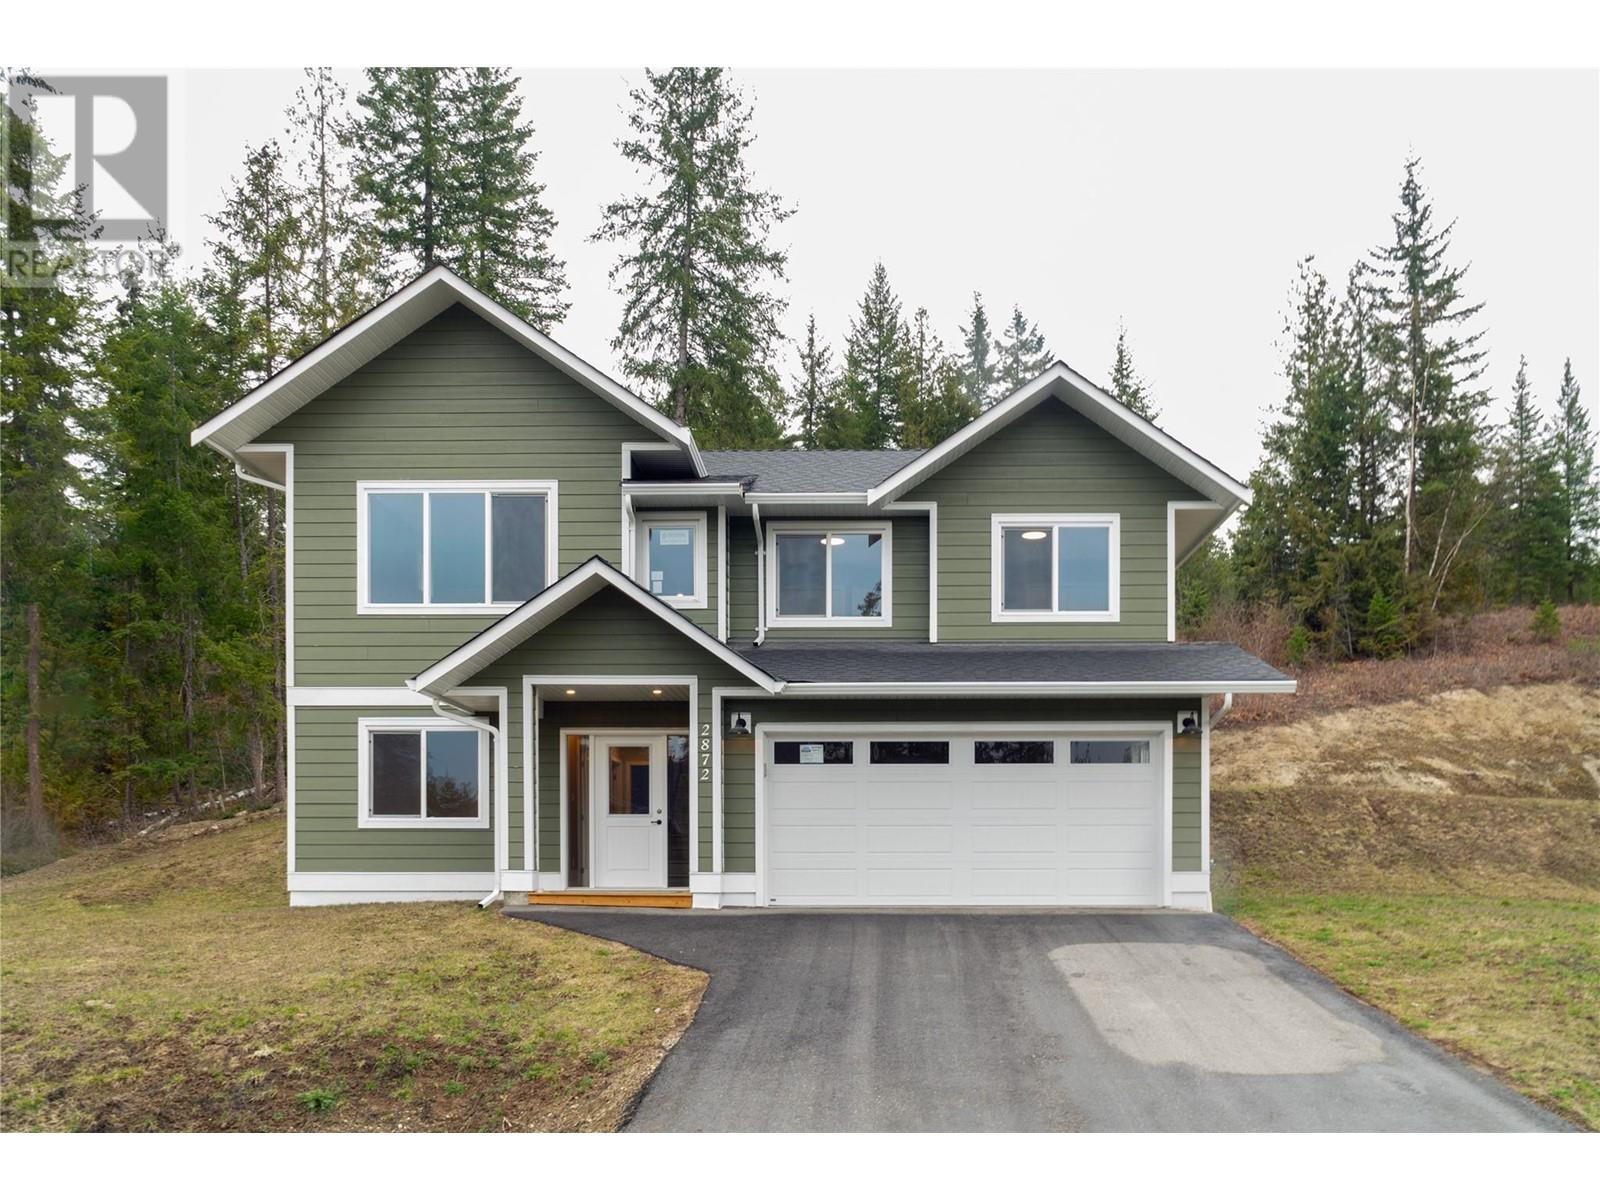 2872 Golf Course Drive located in Blind Bay, British Columbia